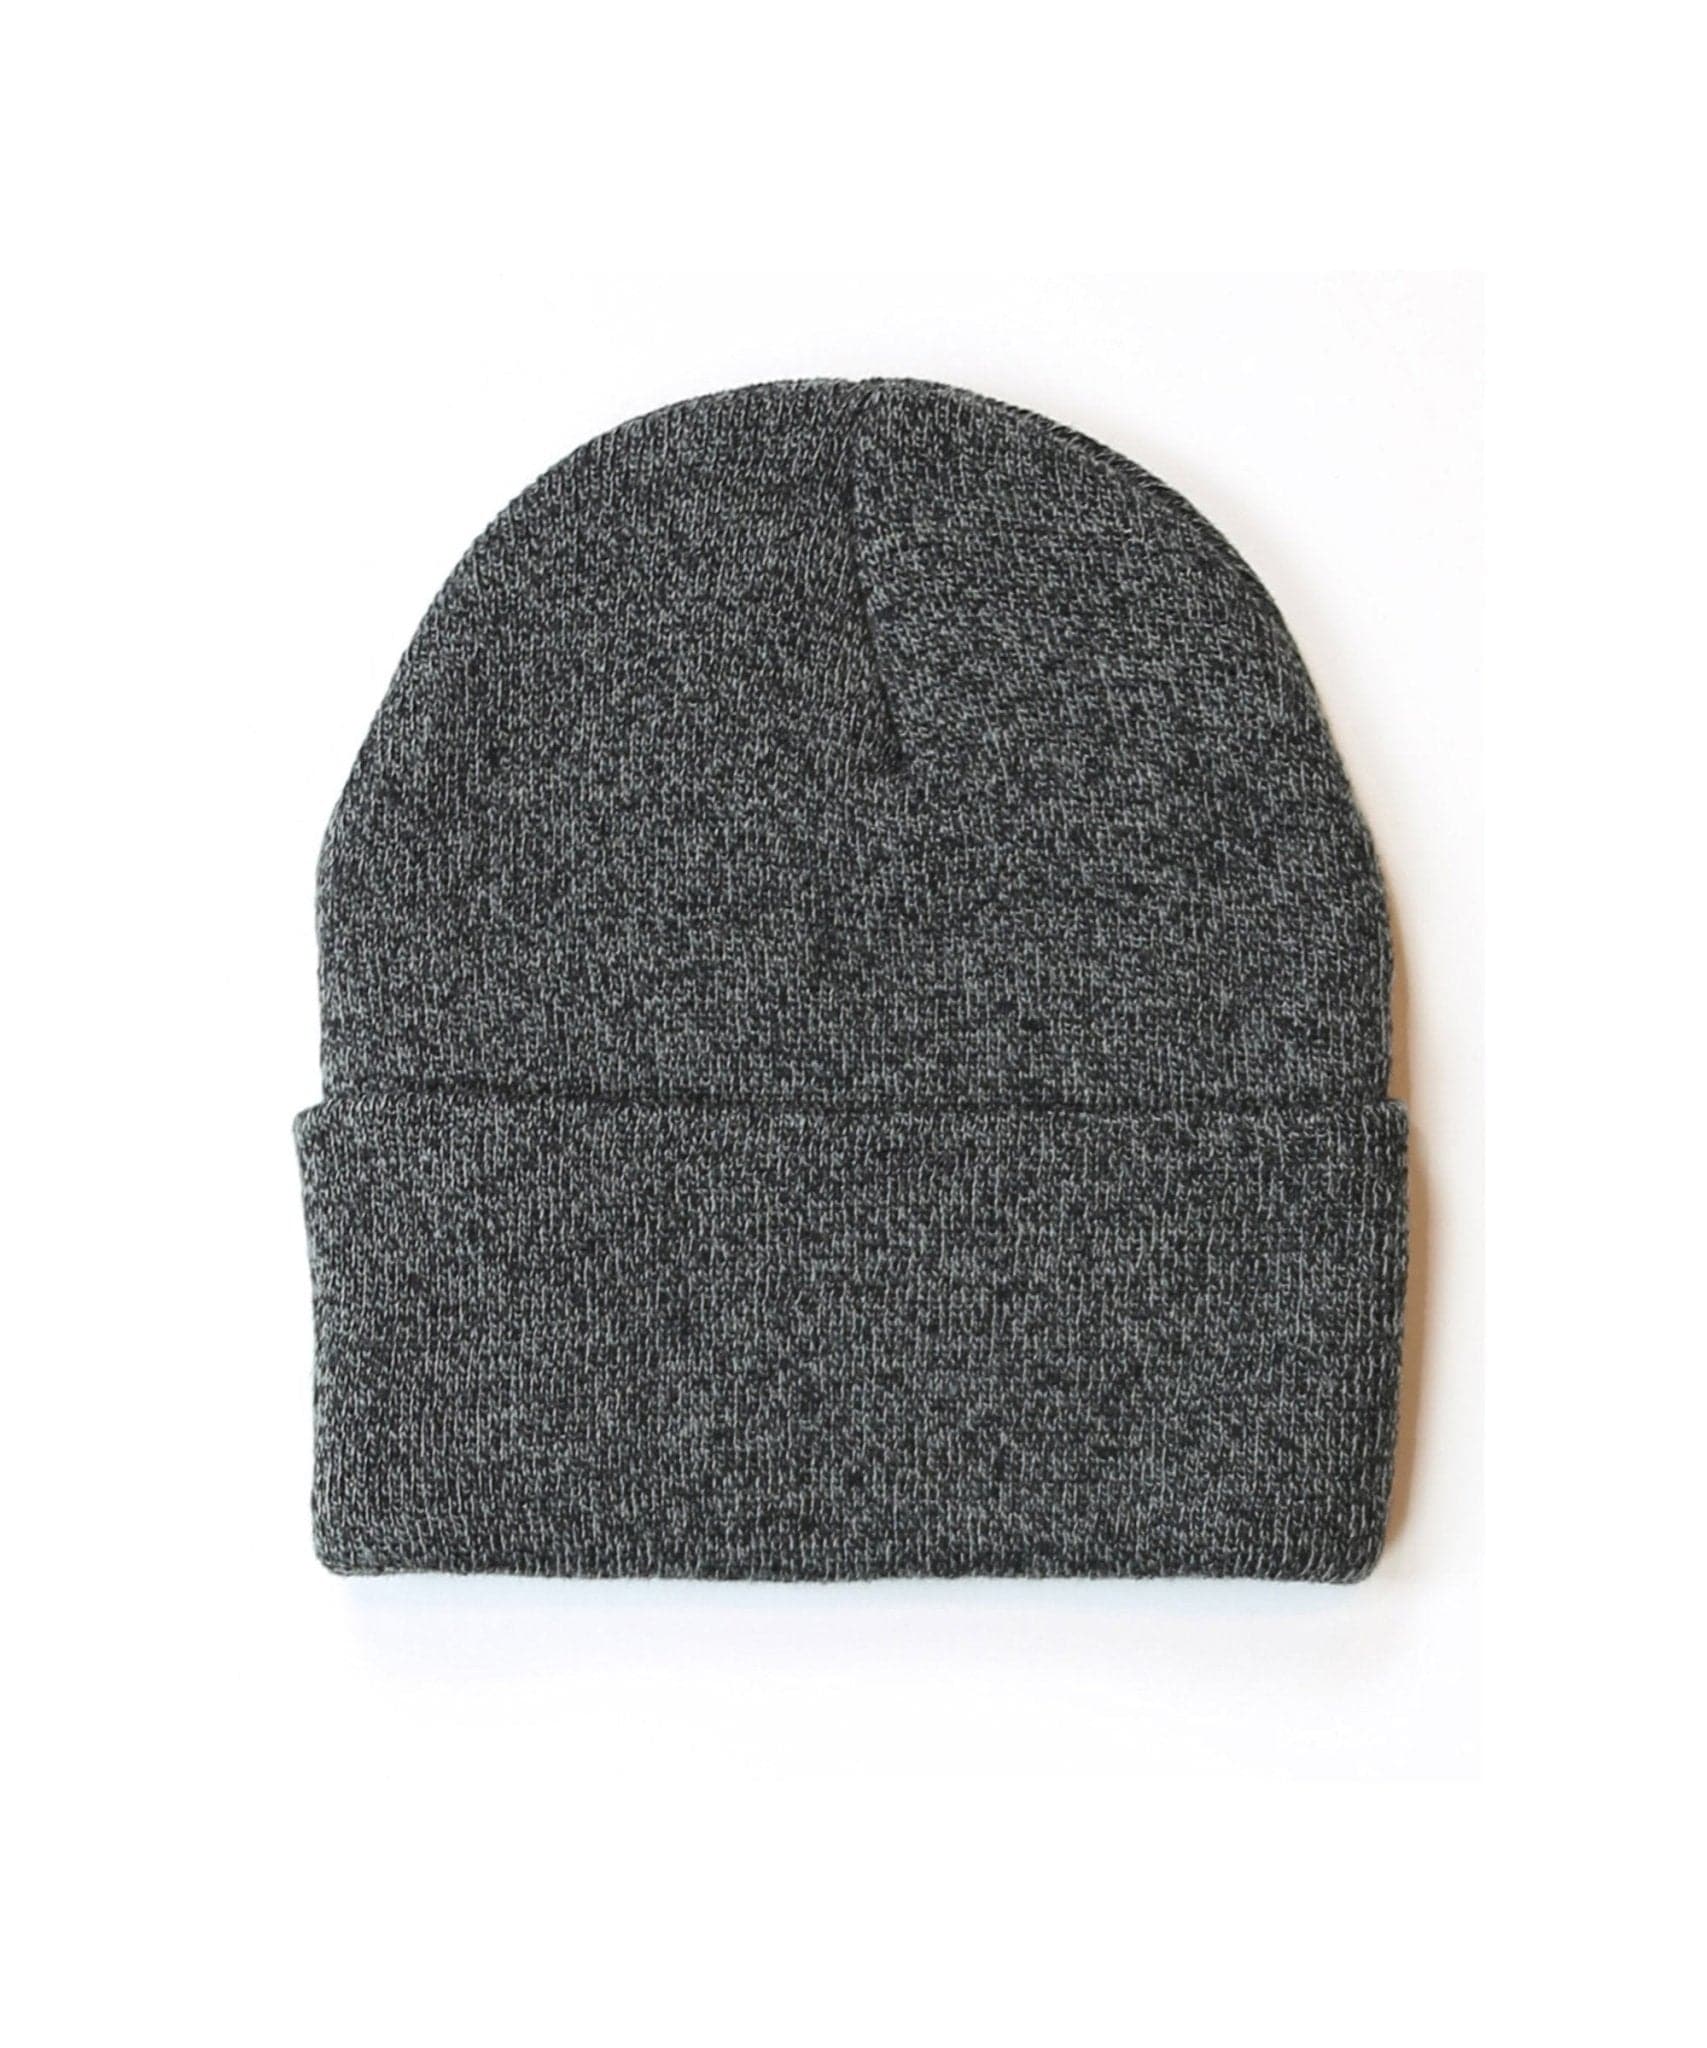 PAPER PLANES - PATCH SKULLY BEANIE (HEATHER CHARCOAL) - The Magnolia Park